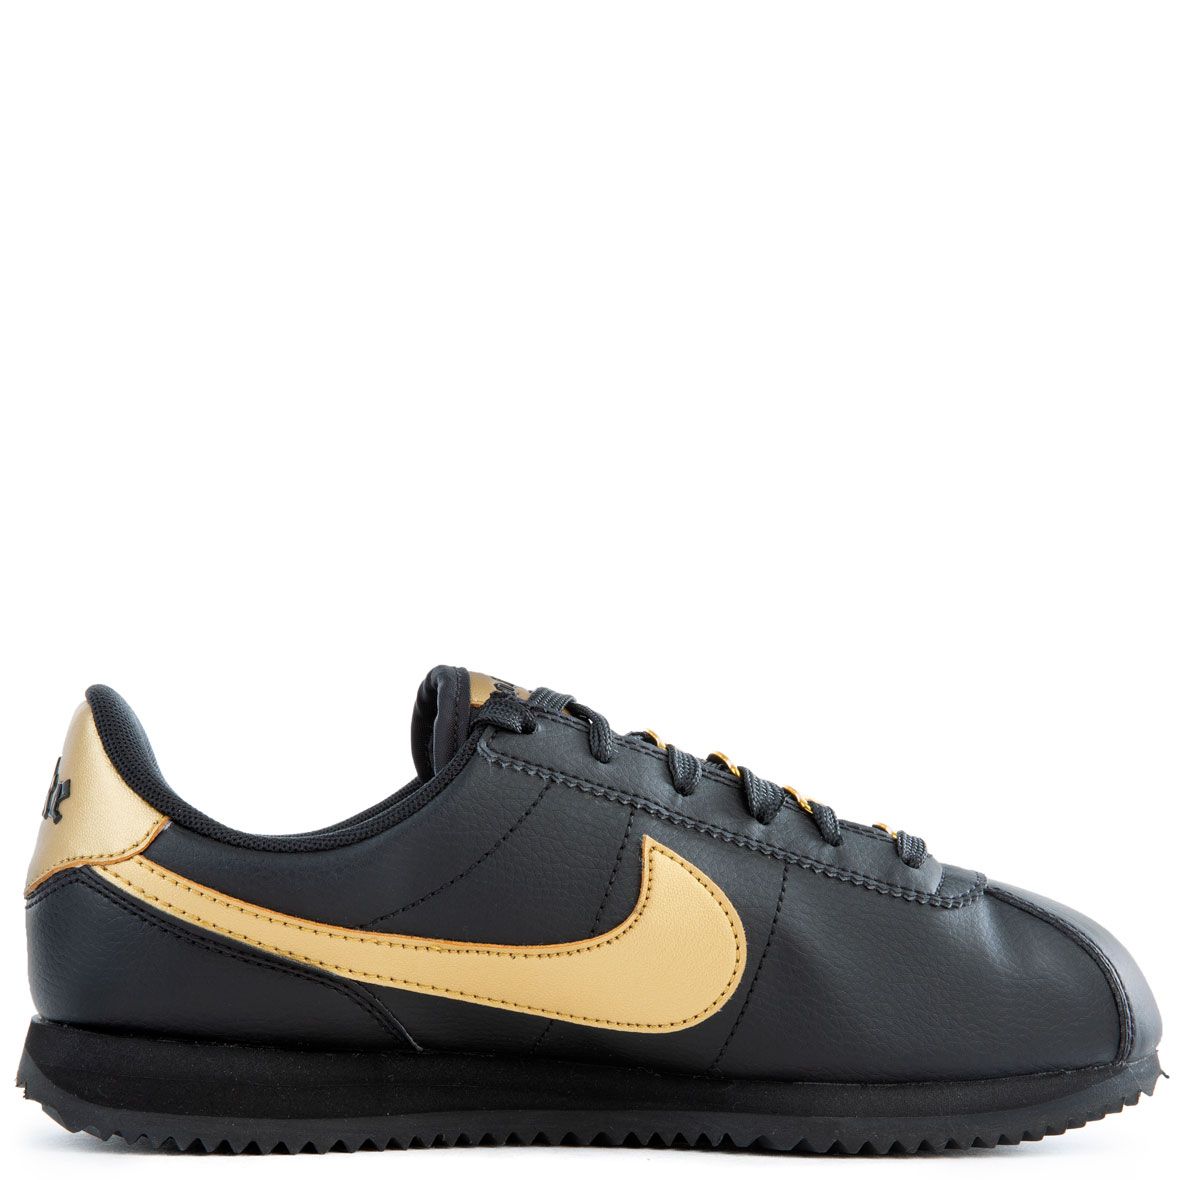 NIKE CORTEZ “METALLIC PACK” IN GOLD, SILVER AND BRONZE – 8&9 Clothing Co.